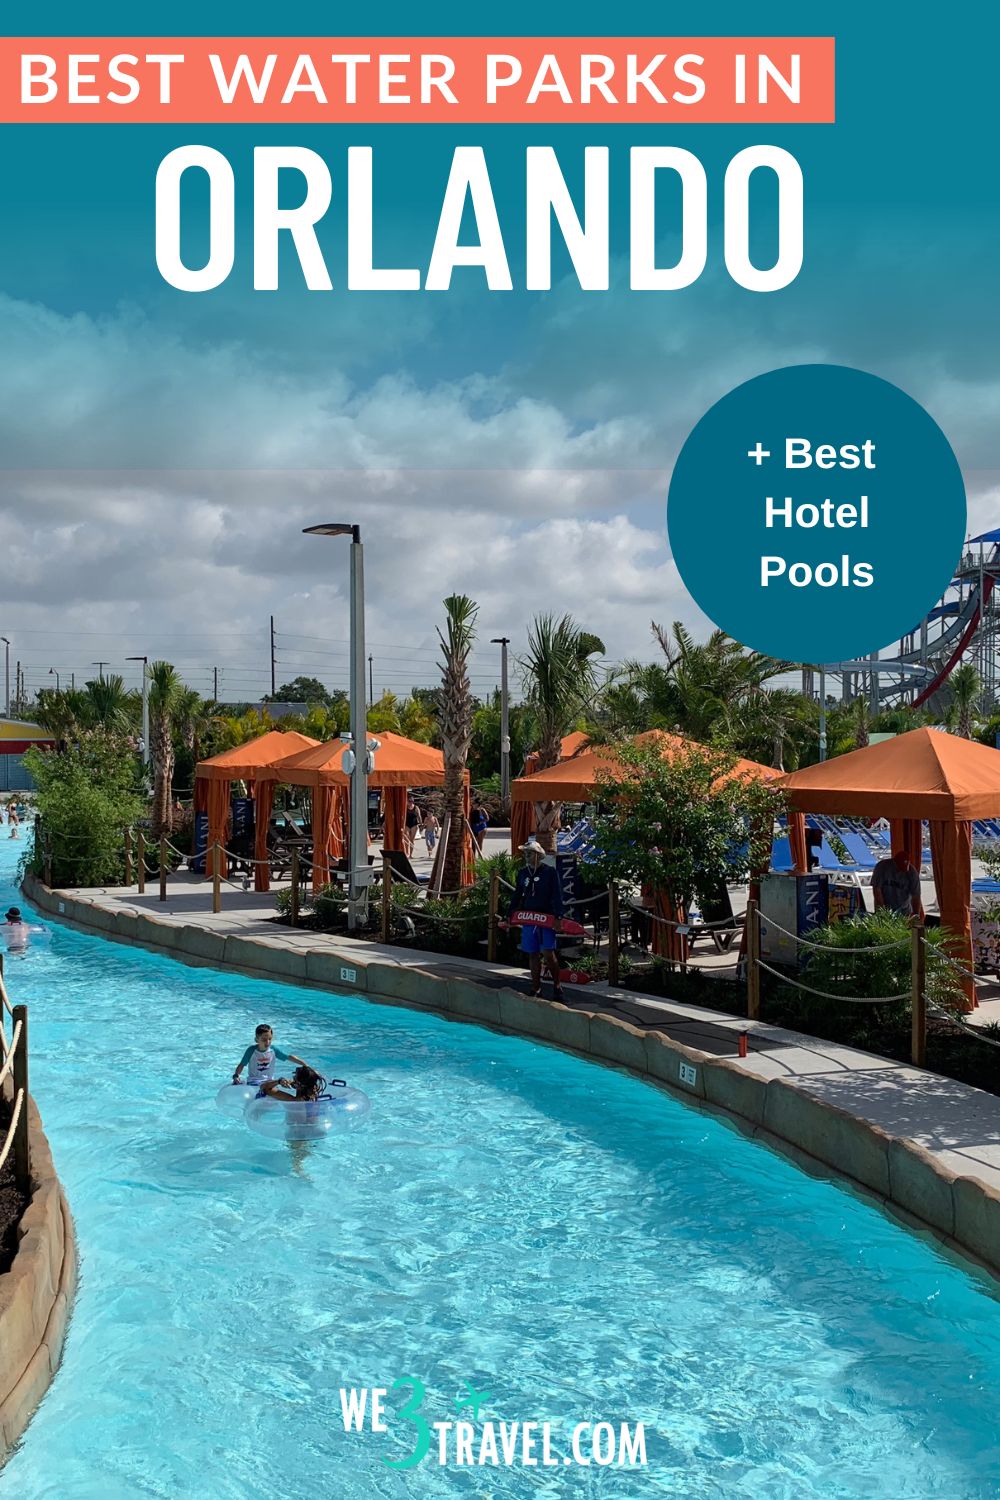 Don't just do Disney or Universal! Try one of these best water parks in Orlando including Volcano Bay, Island H2O, Blizzard Beach, Typhoon Lagoon, Aquatica, and Legoland on your next Florida family vacation.. Plus, check out these Orlando hotel pools and on-site water parks.